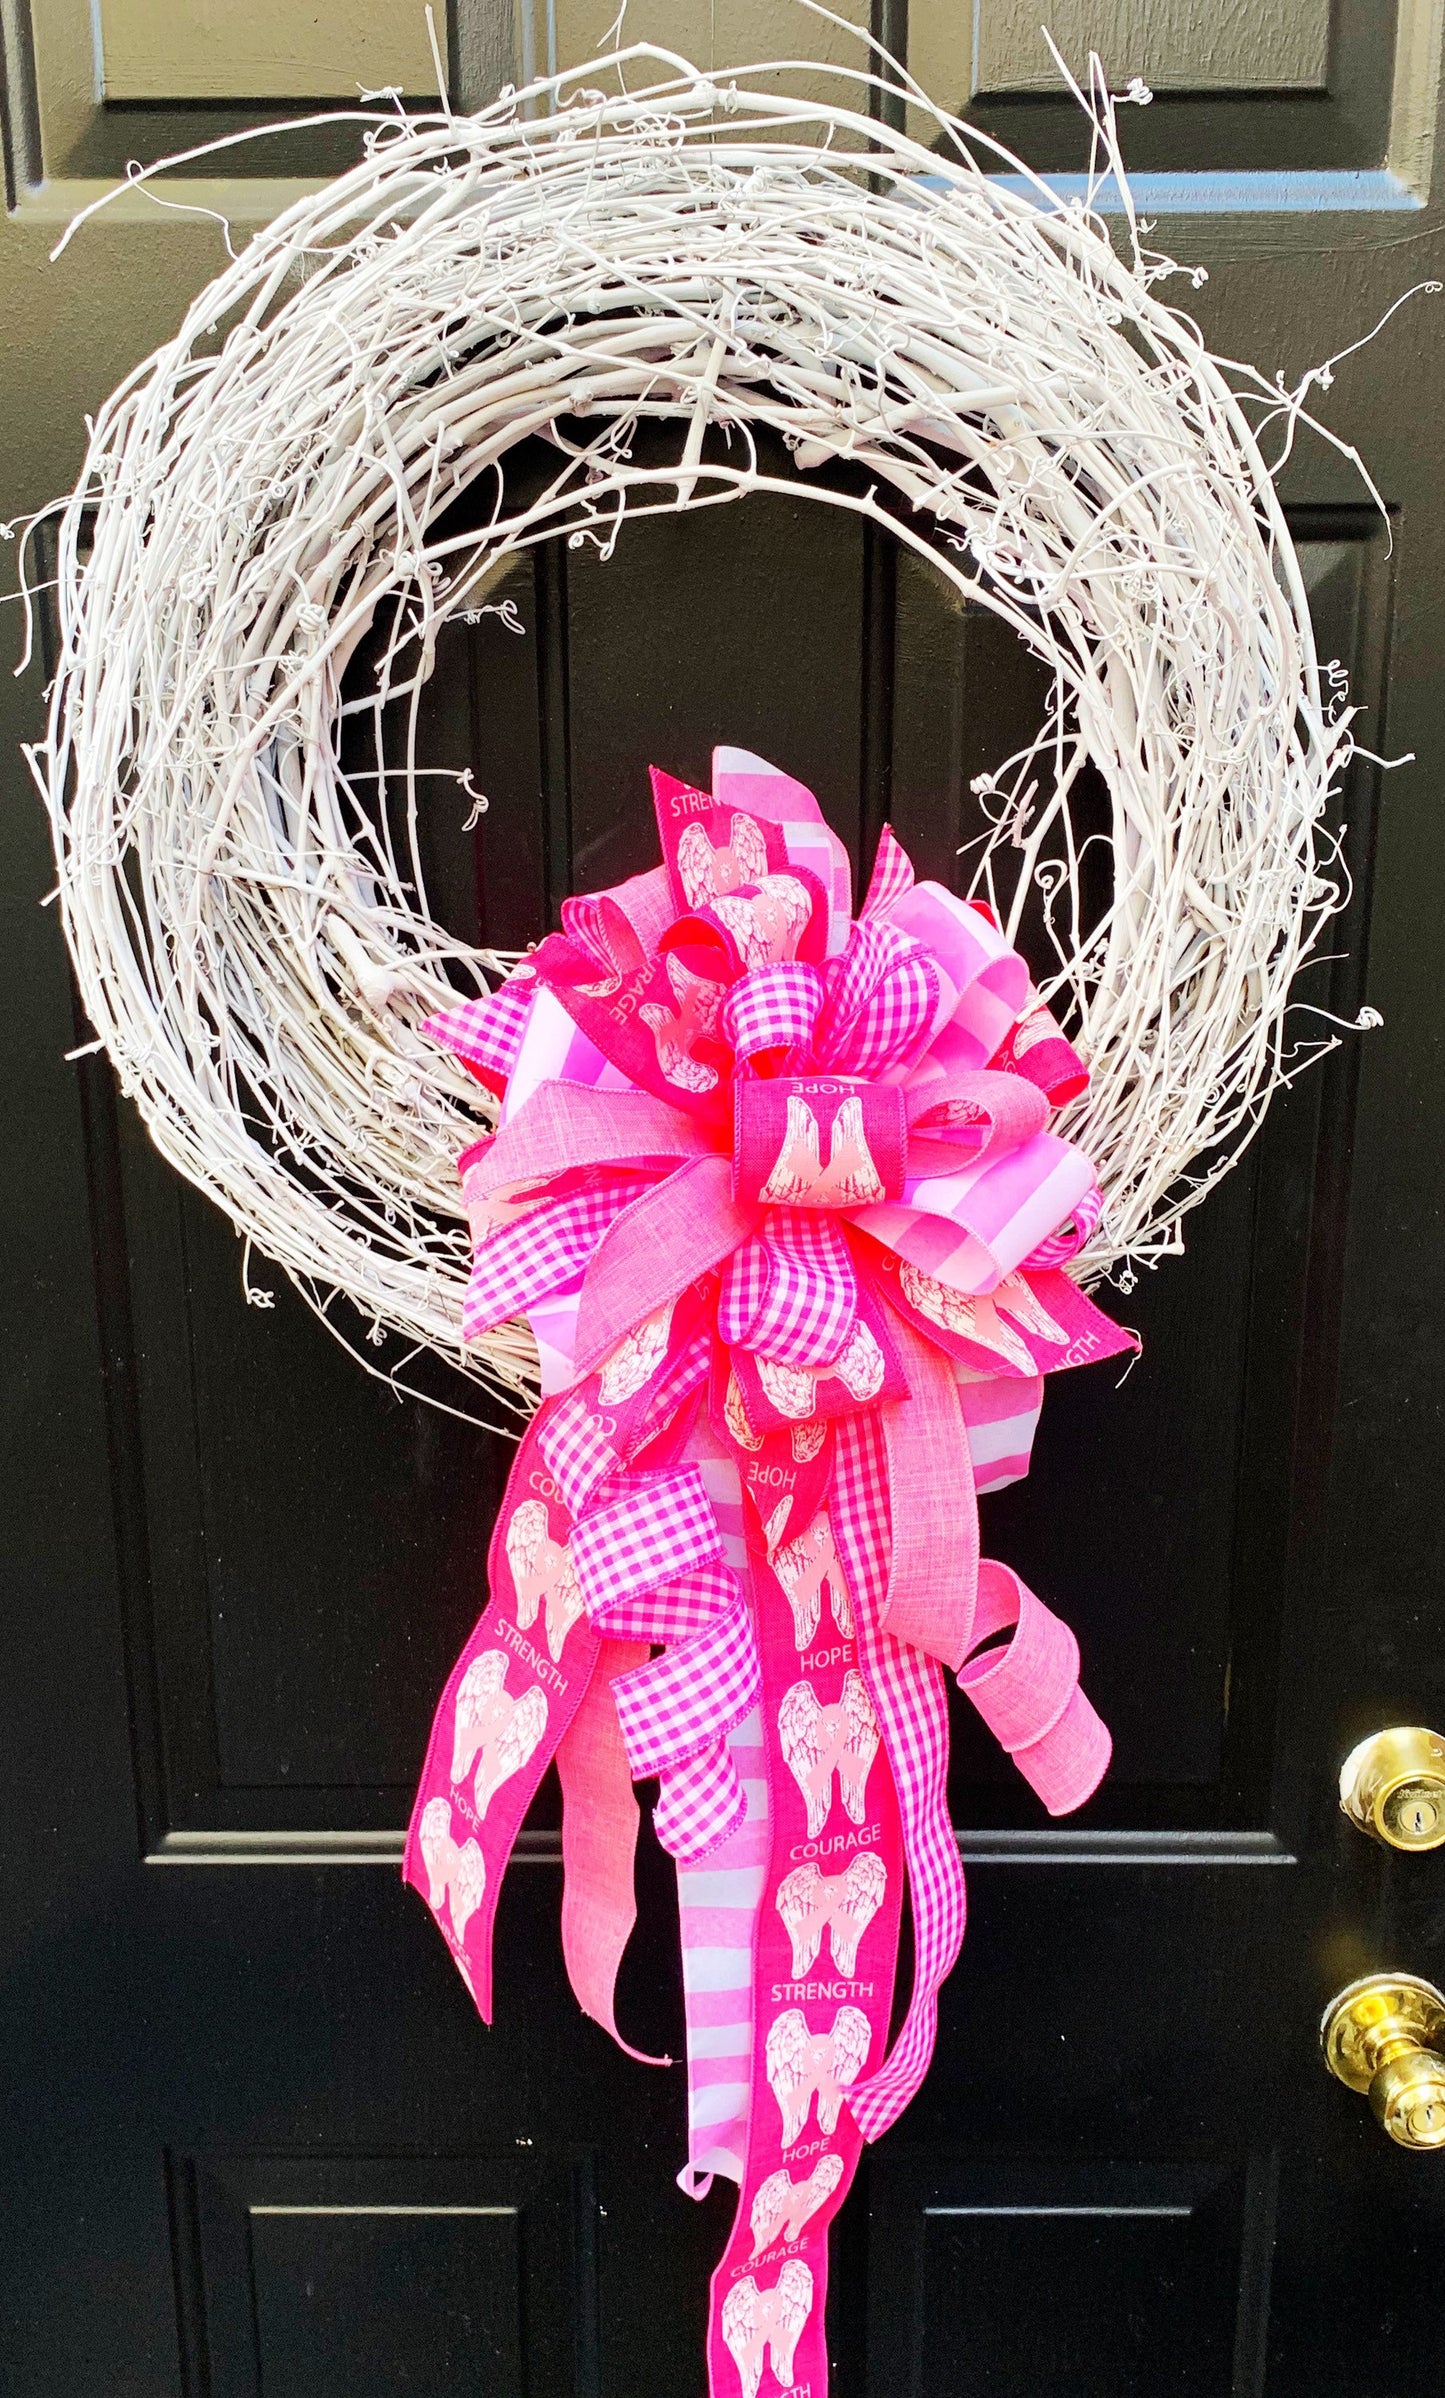 Everyday Collection - Hope Bow,Courage Bow,Strength Bow,Breast Cancer Bow,Pink Bow,Mailbox Bow,Wreath Bow,Large Bow,Gift Bow,Bow,Bow